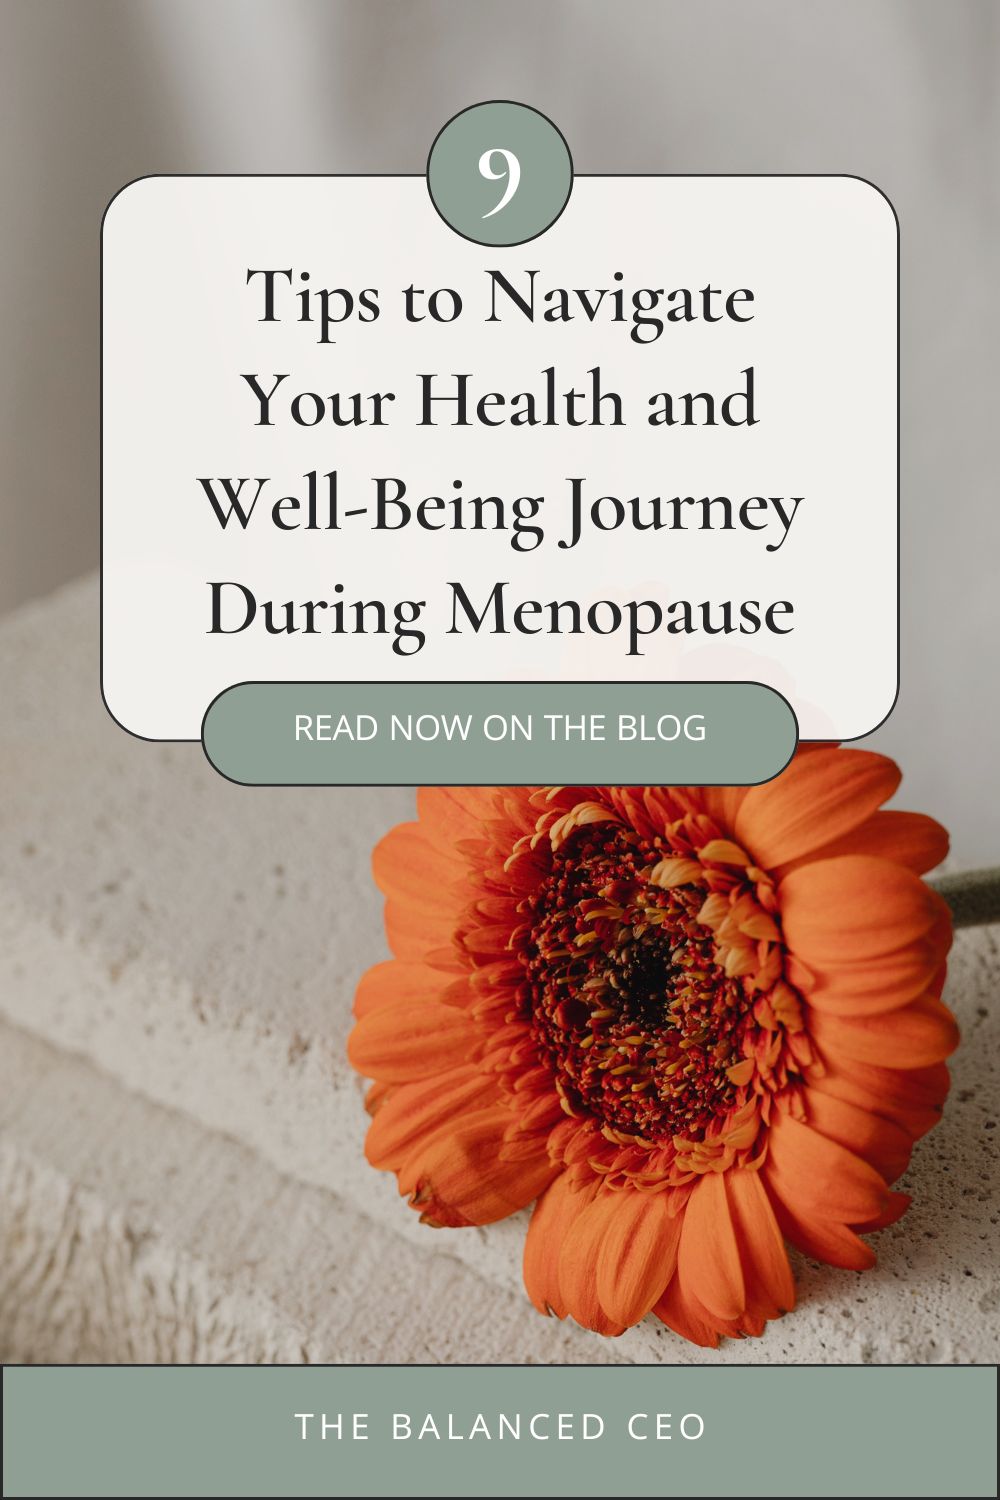 9 Tips to Navigate Your Health and Well-Being Journey During Menopause